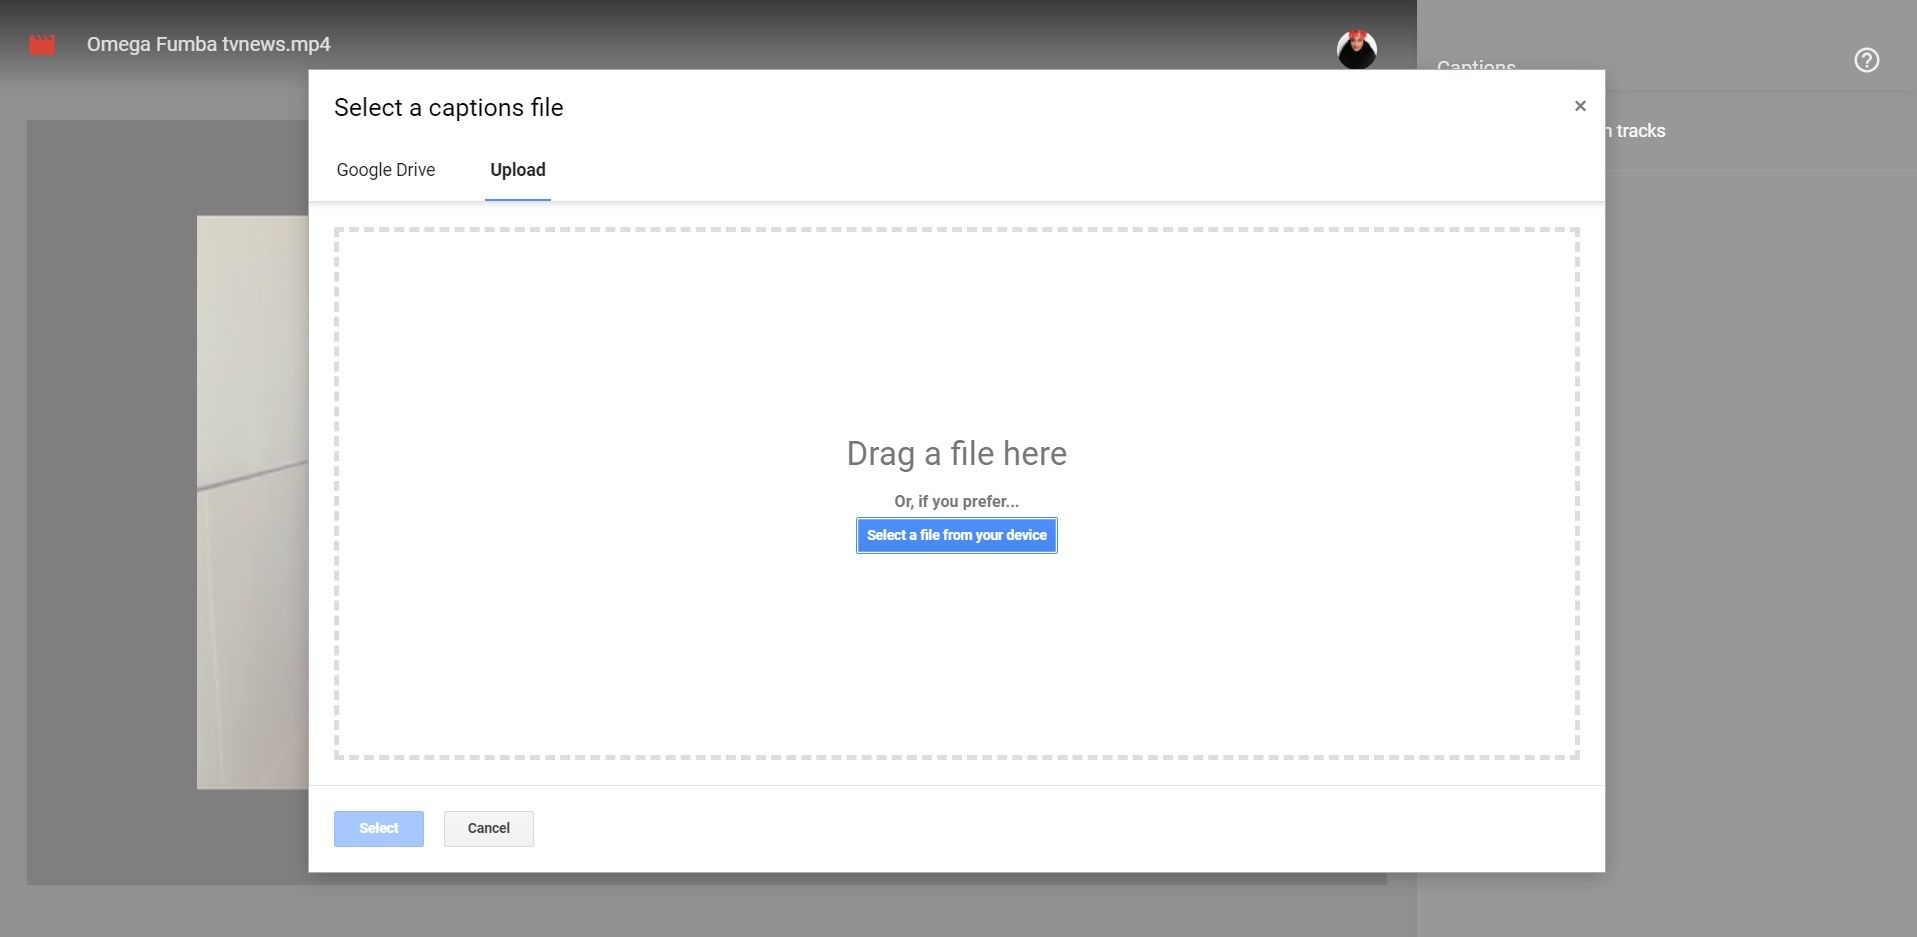 Uploading a file in Google Drive